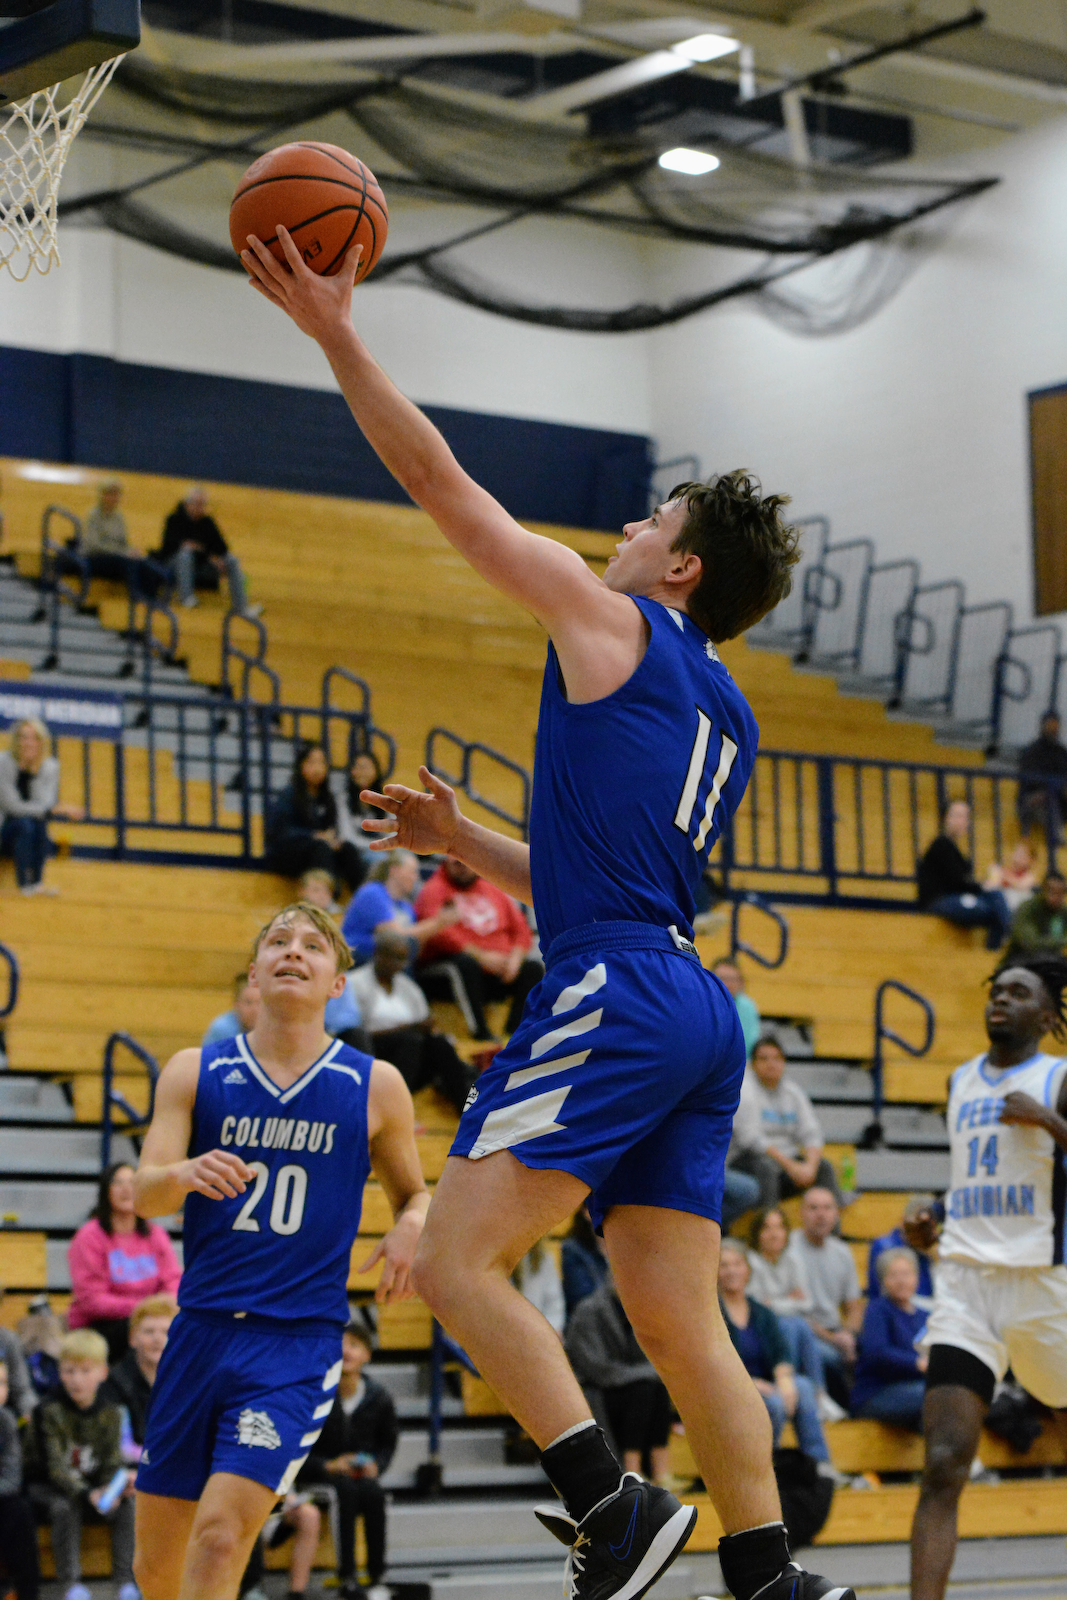 North boys roll past Perry Meridian 49-26 in varsity basketball cover photo